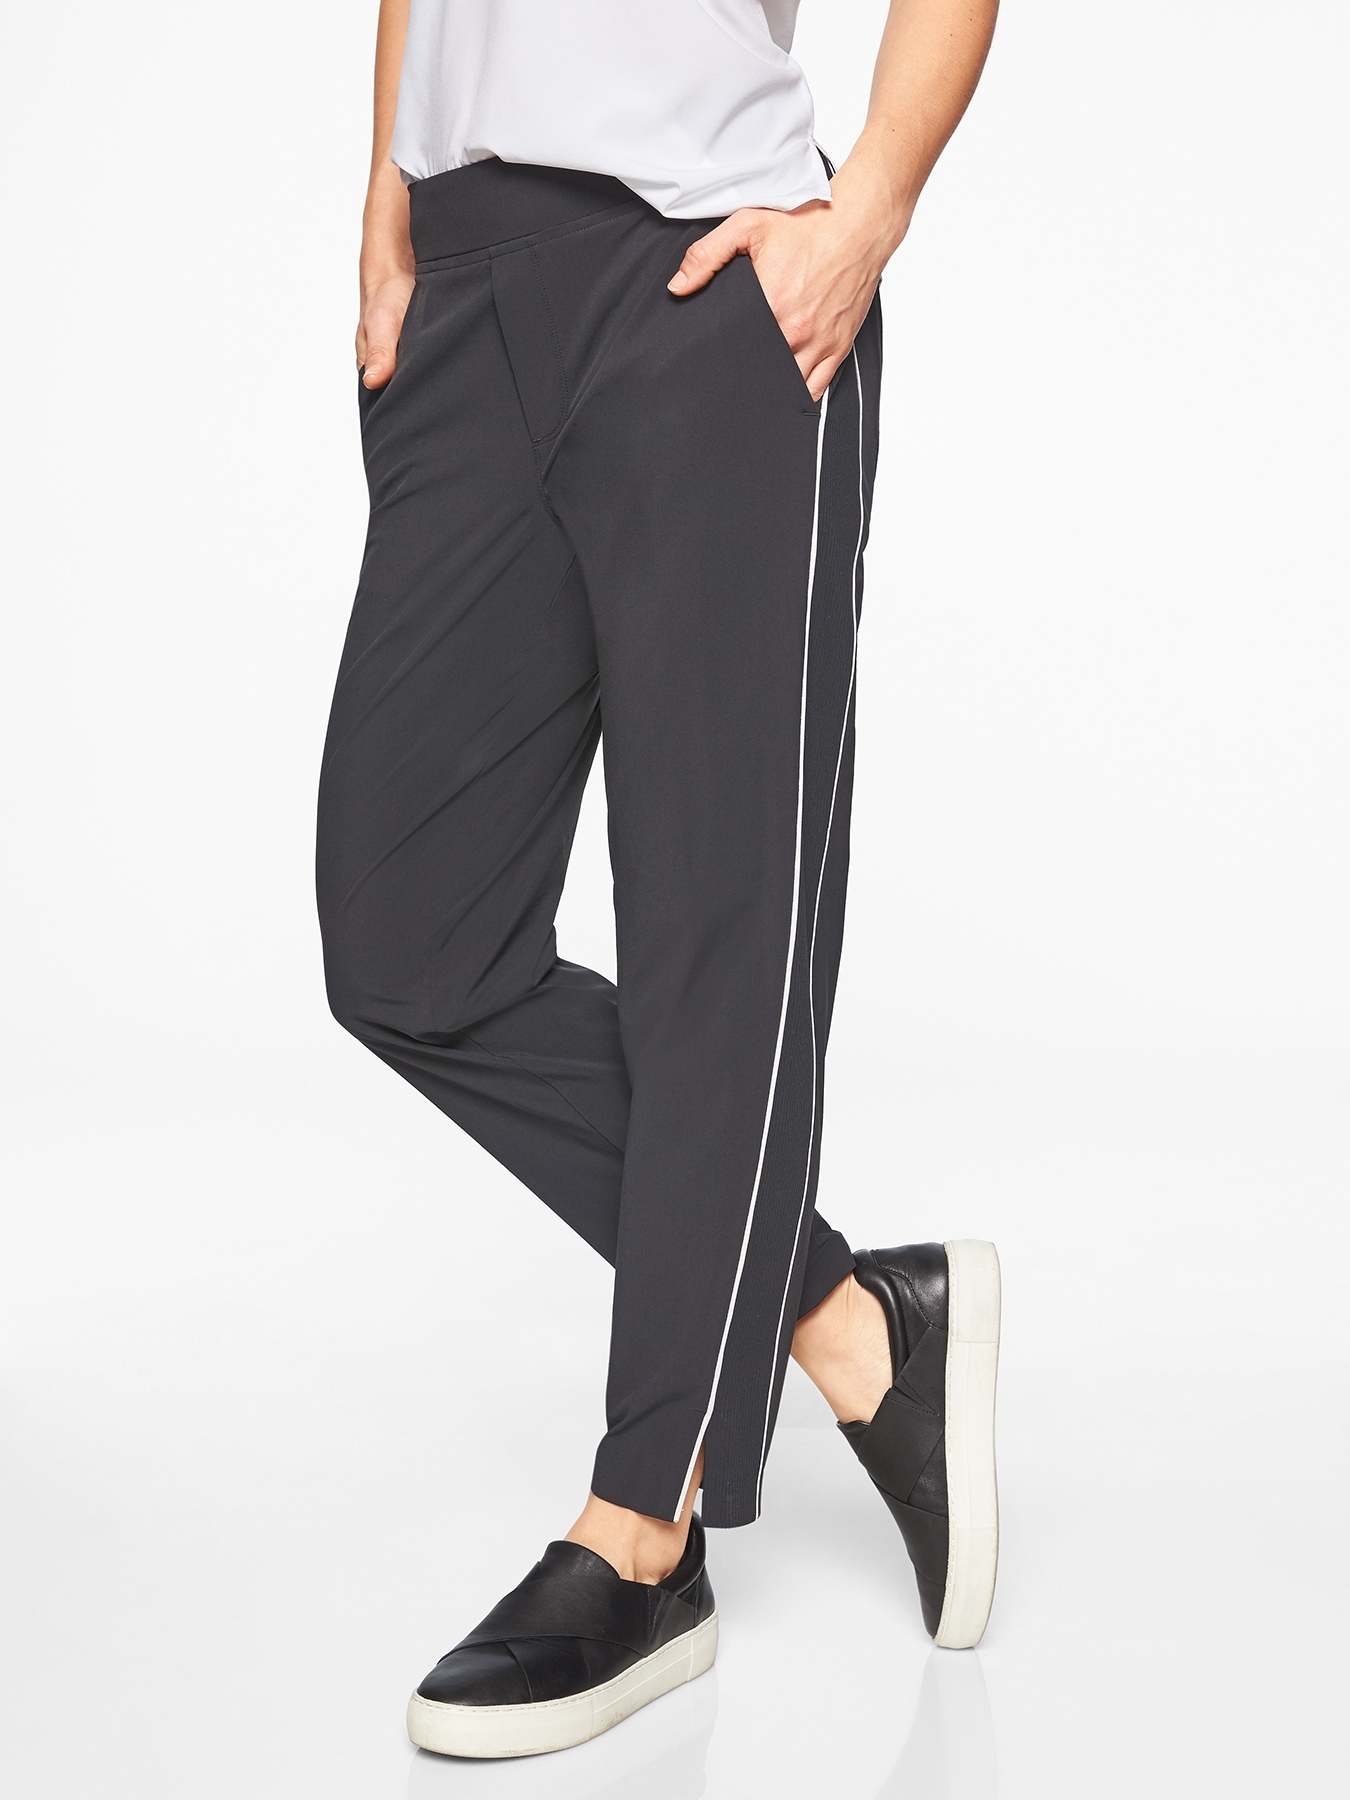 One of the most versatile pants you could ever own and comes in many  colors. The Brooklyn Ankle Pant by @athleta #athletapartner #powerof